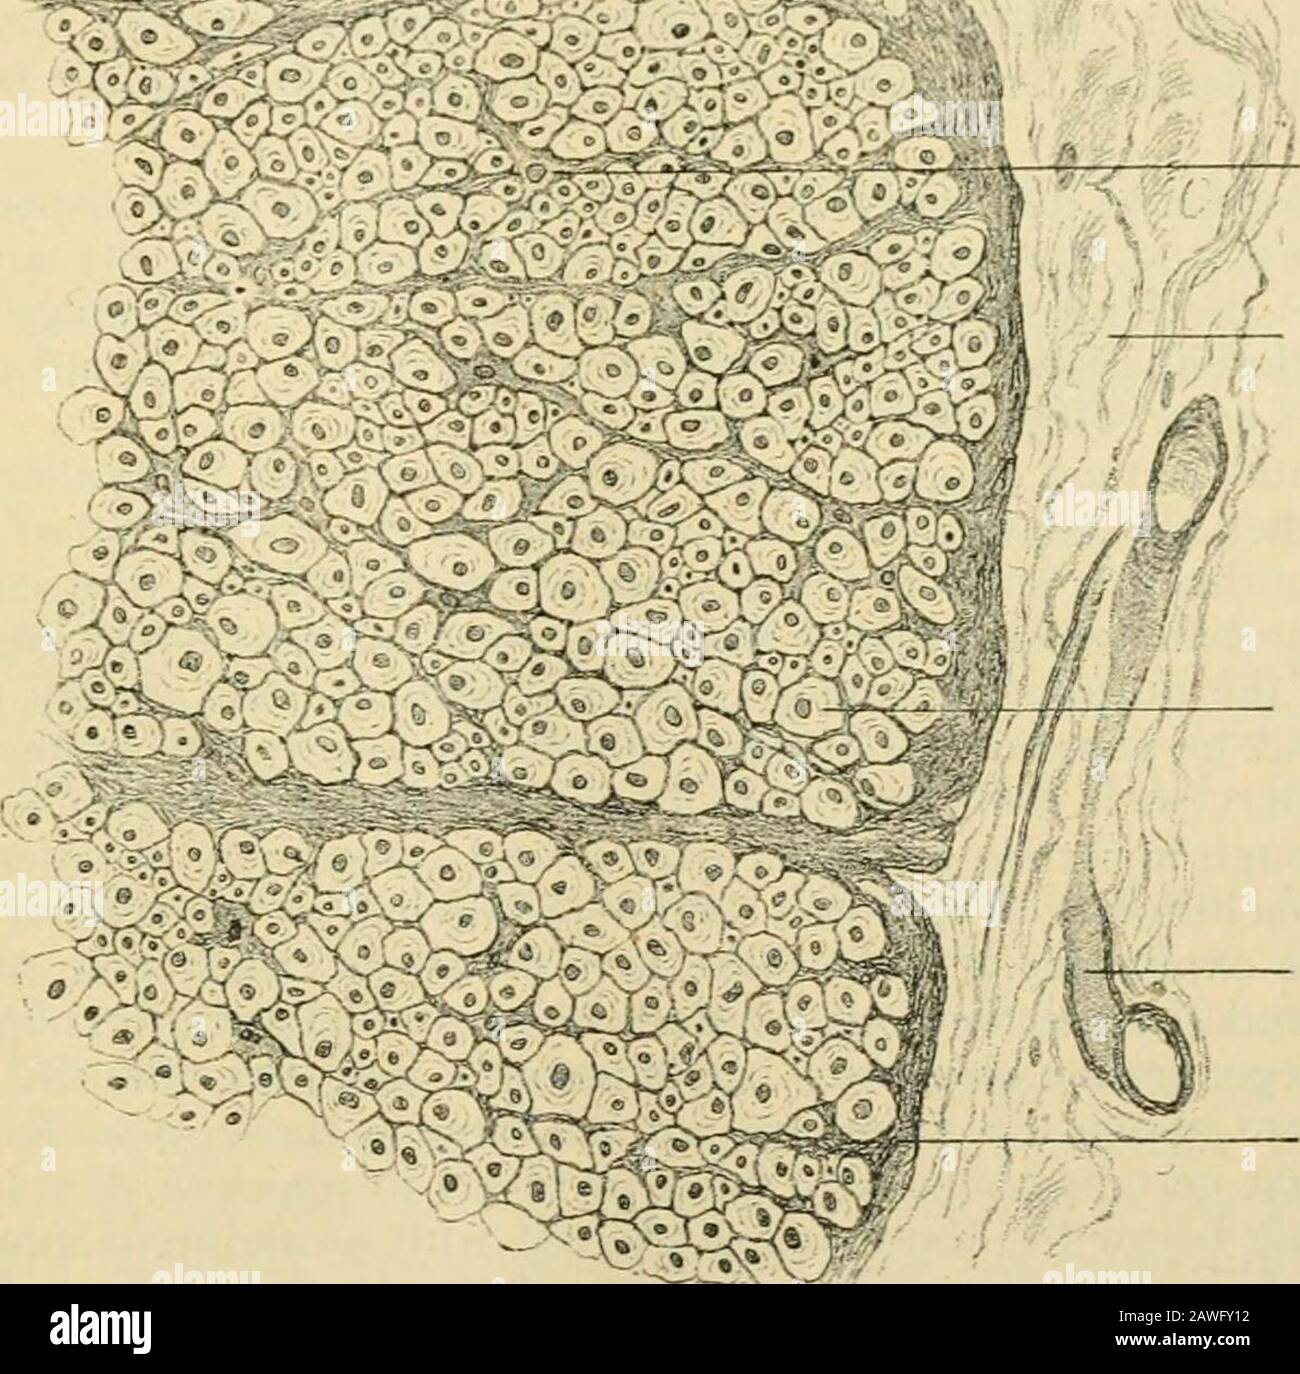 Human anatomy, including structure and development and practical considerations . o be composetl of iniuunerable, closely set, small cells, heldtoii^ether by delicate supportniii;- tissue. These ai)j)arent cells are the niedullatcdnerve-fibres cut transversely, in which the sectioned axis-cylinders show as deeplystained dots, that commonly lie somewhat eccentrically and are surrounded by deli-cate irrei^ularly annular striations representing the framework of the medullary c&lt;xat.The ncrve-tibres of the cerebro-spinal axis are without neurilemma, the lack of thissheath beiuir compensated l)y Stock Photo